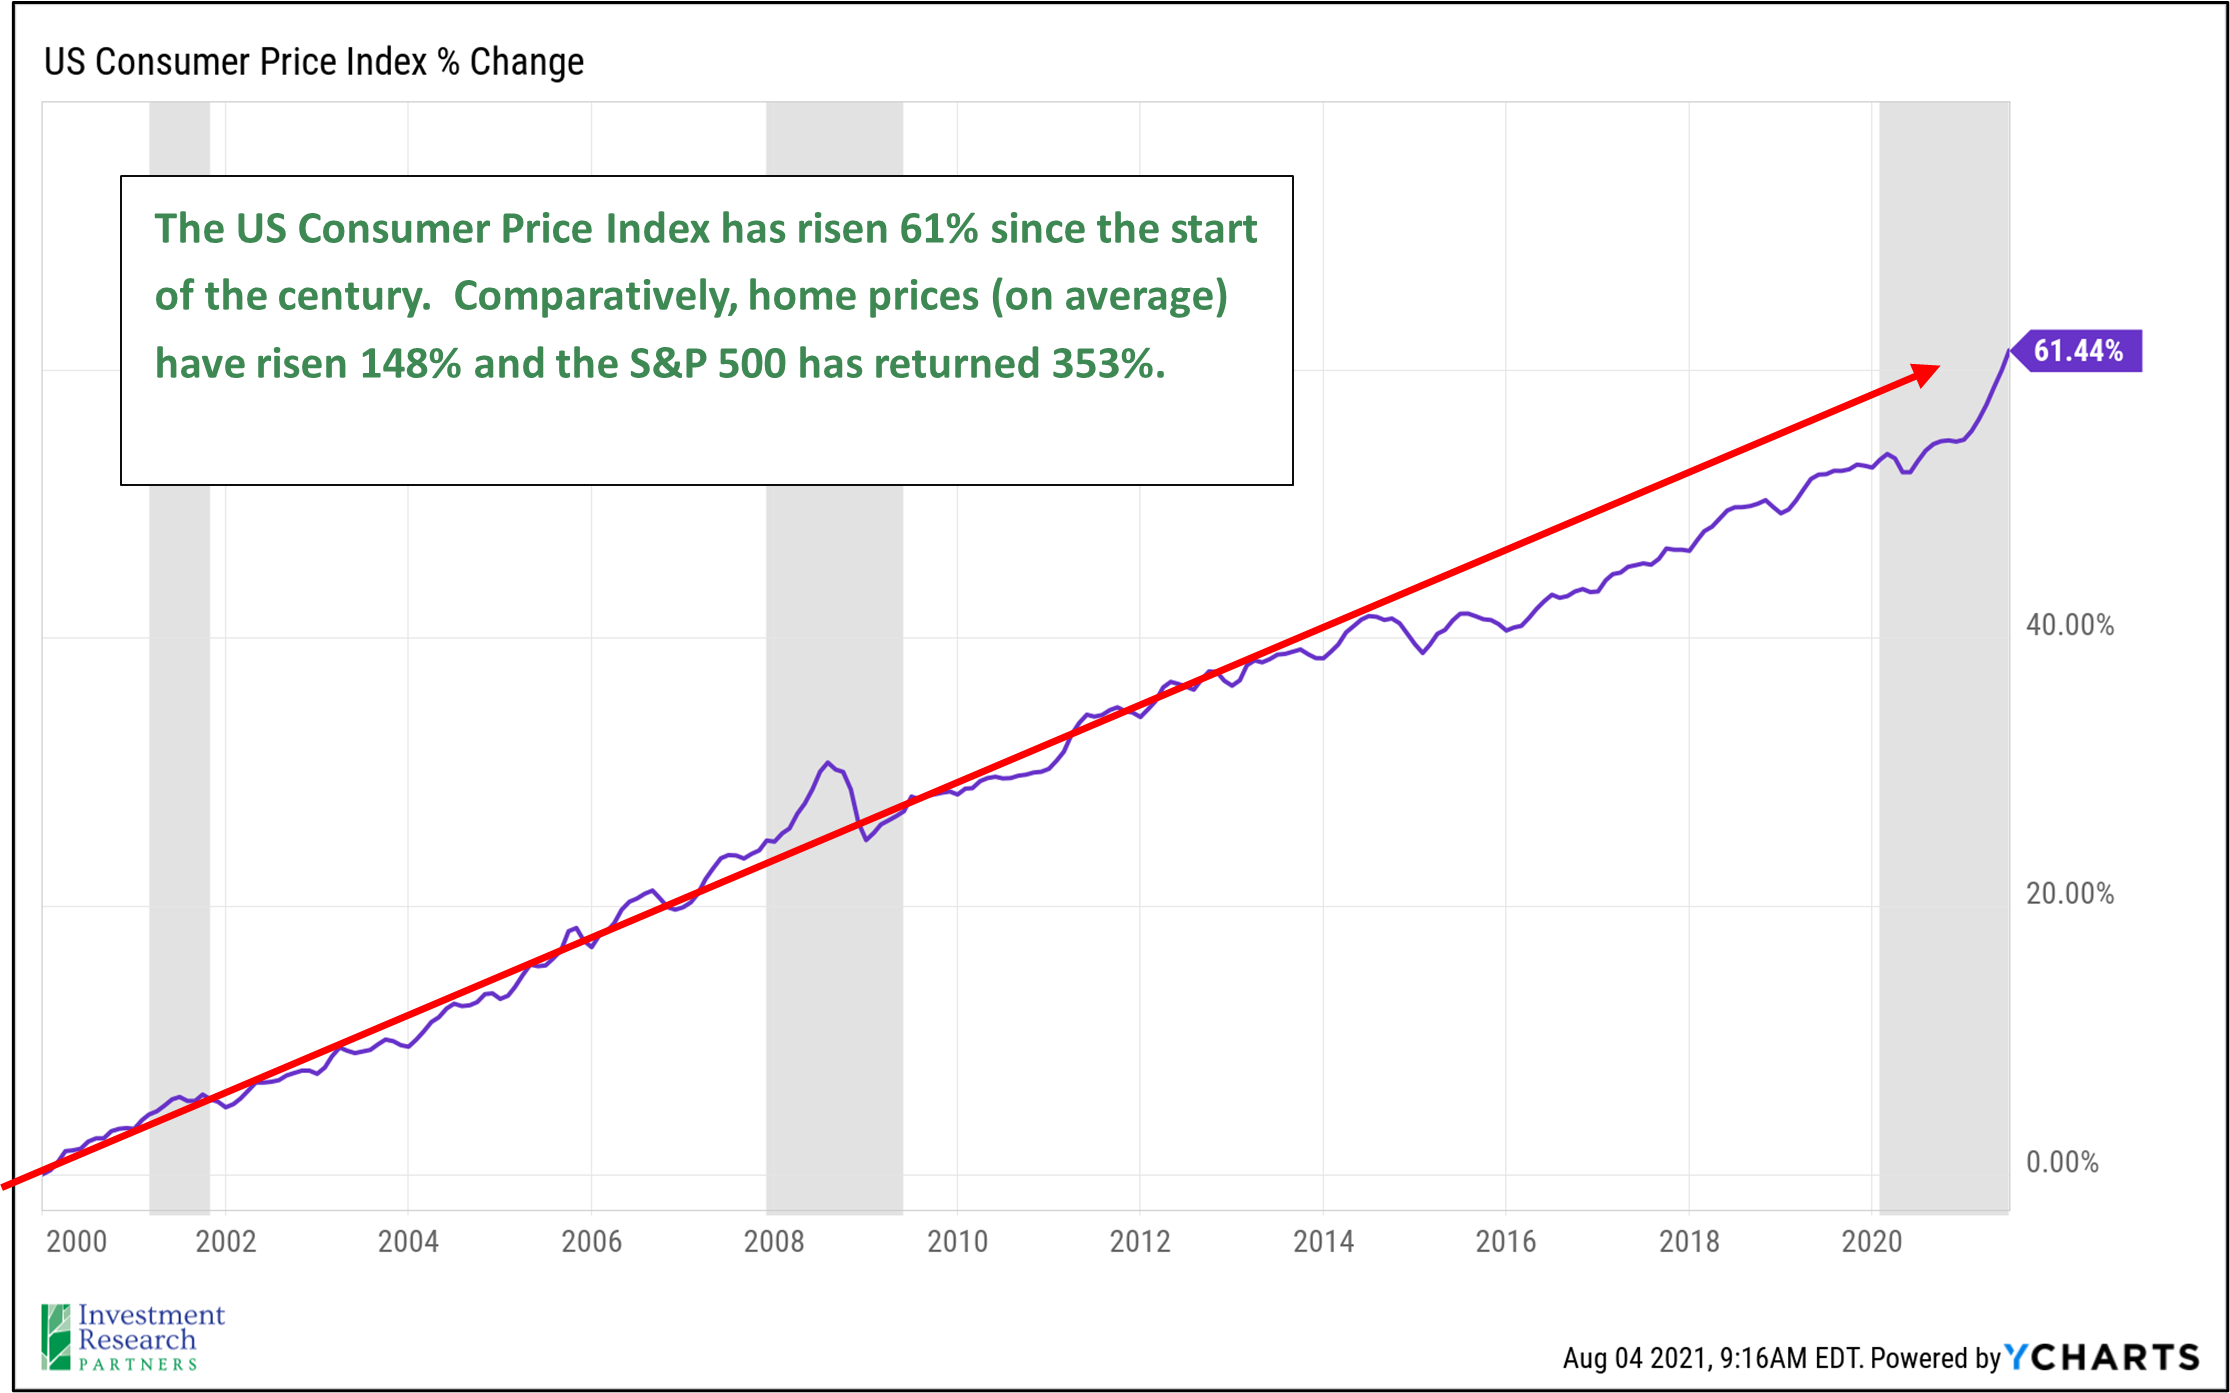 Line graph depicting US Consumer Price Index % Change from 2000 to 2021 with note: The US Consumer Price Index has risen 61% since the start of the century. Comparatively, home prices (on average) have risen 148% and the S&P 500 has returned 353%.